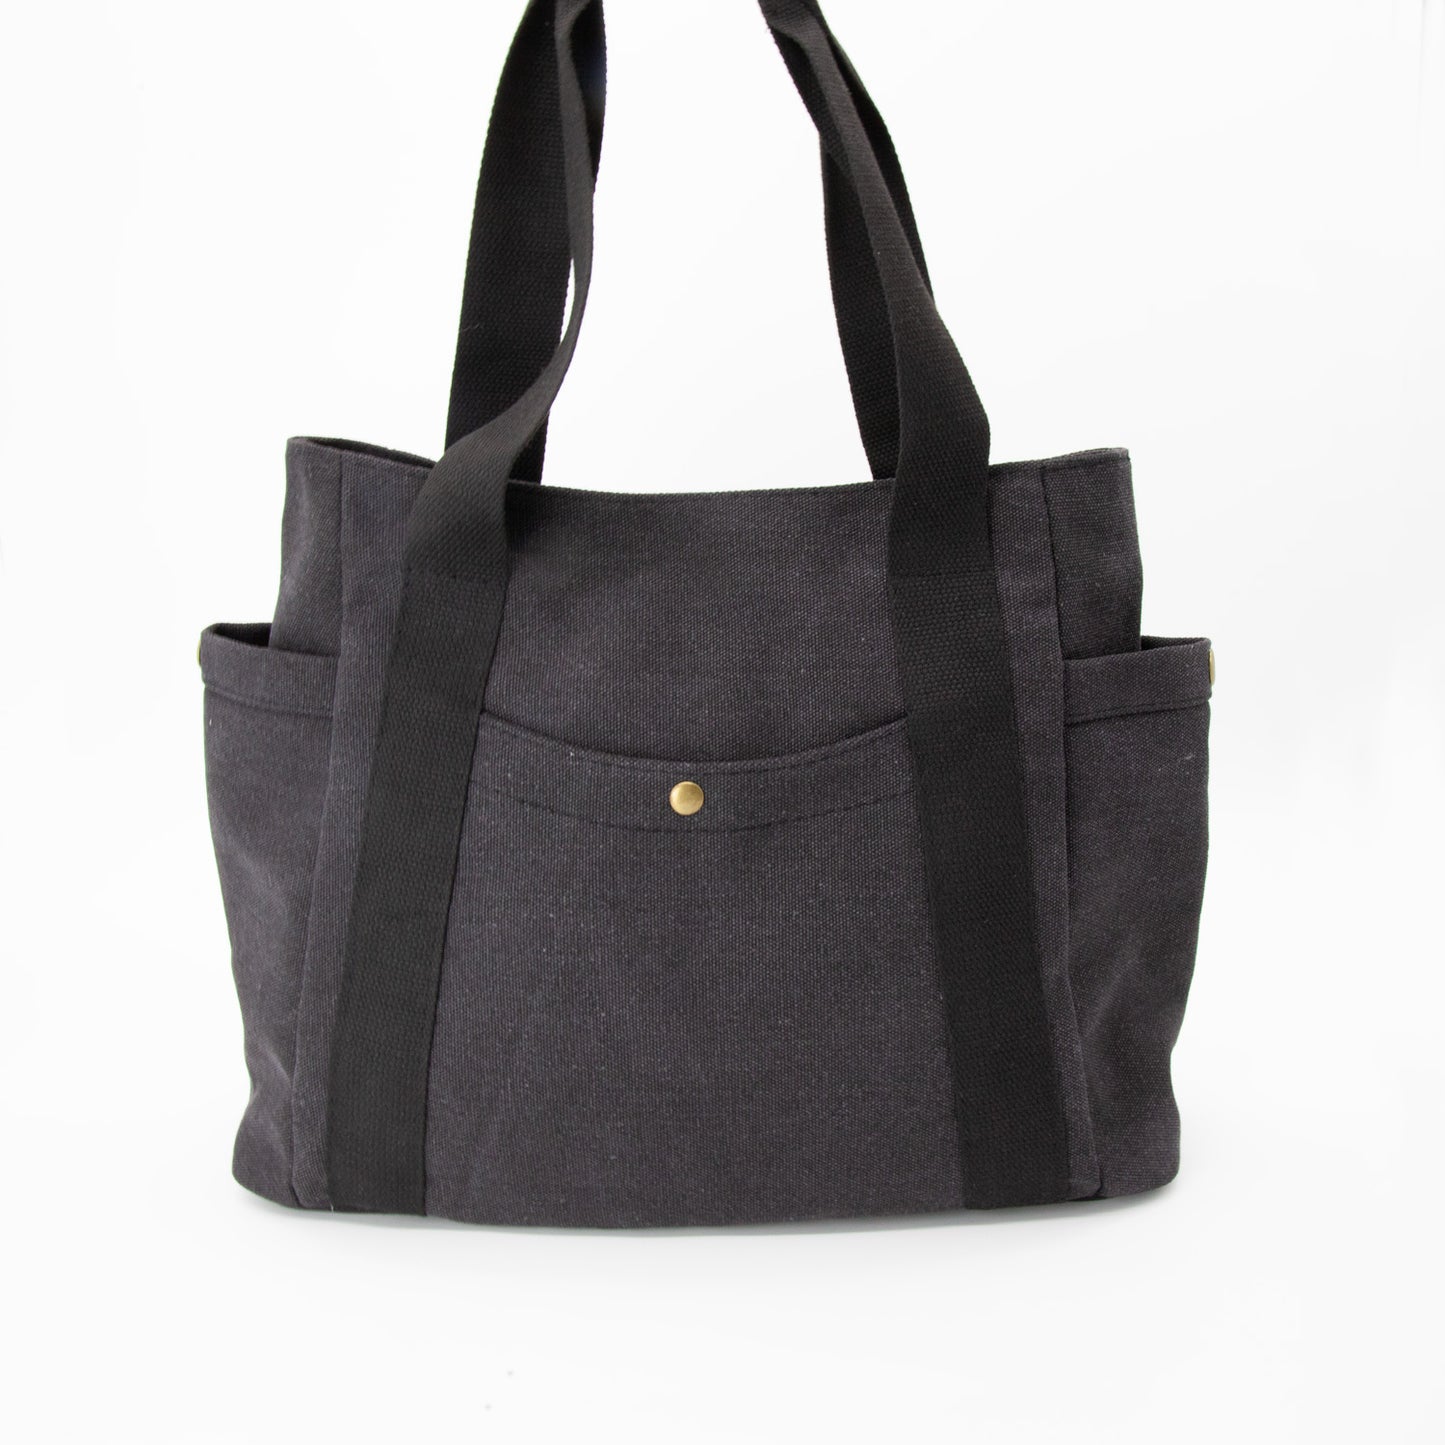 Large Canvas Tote Bag With Pockets & Zipper in Black